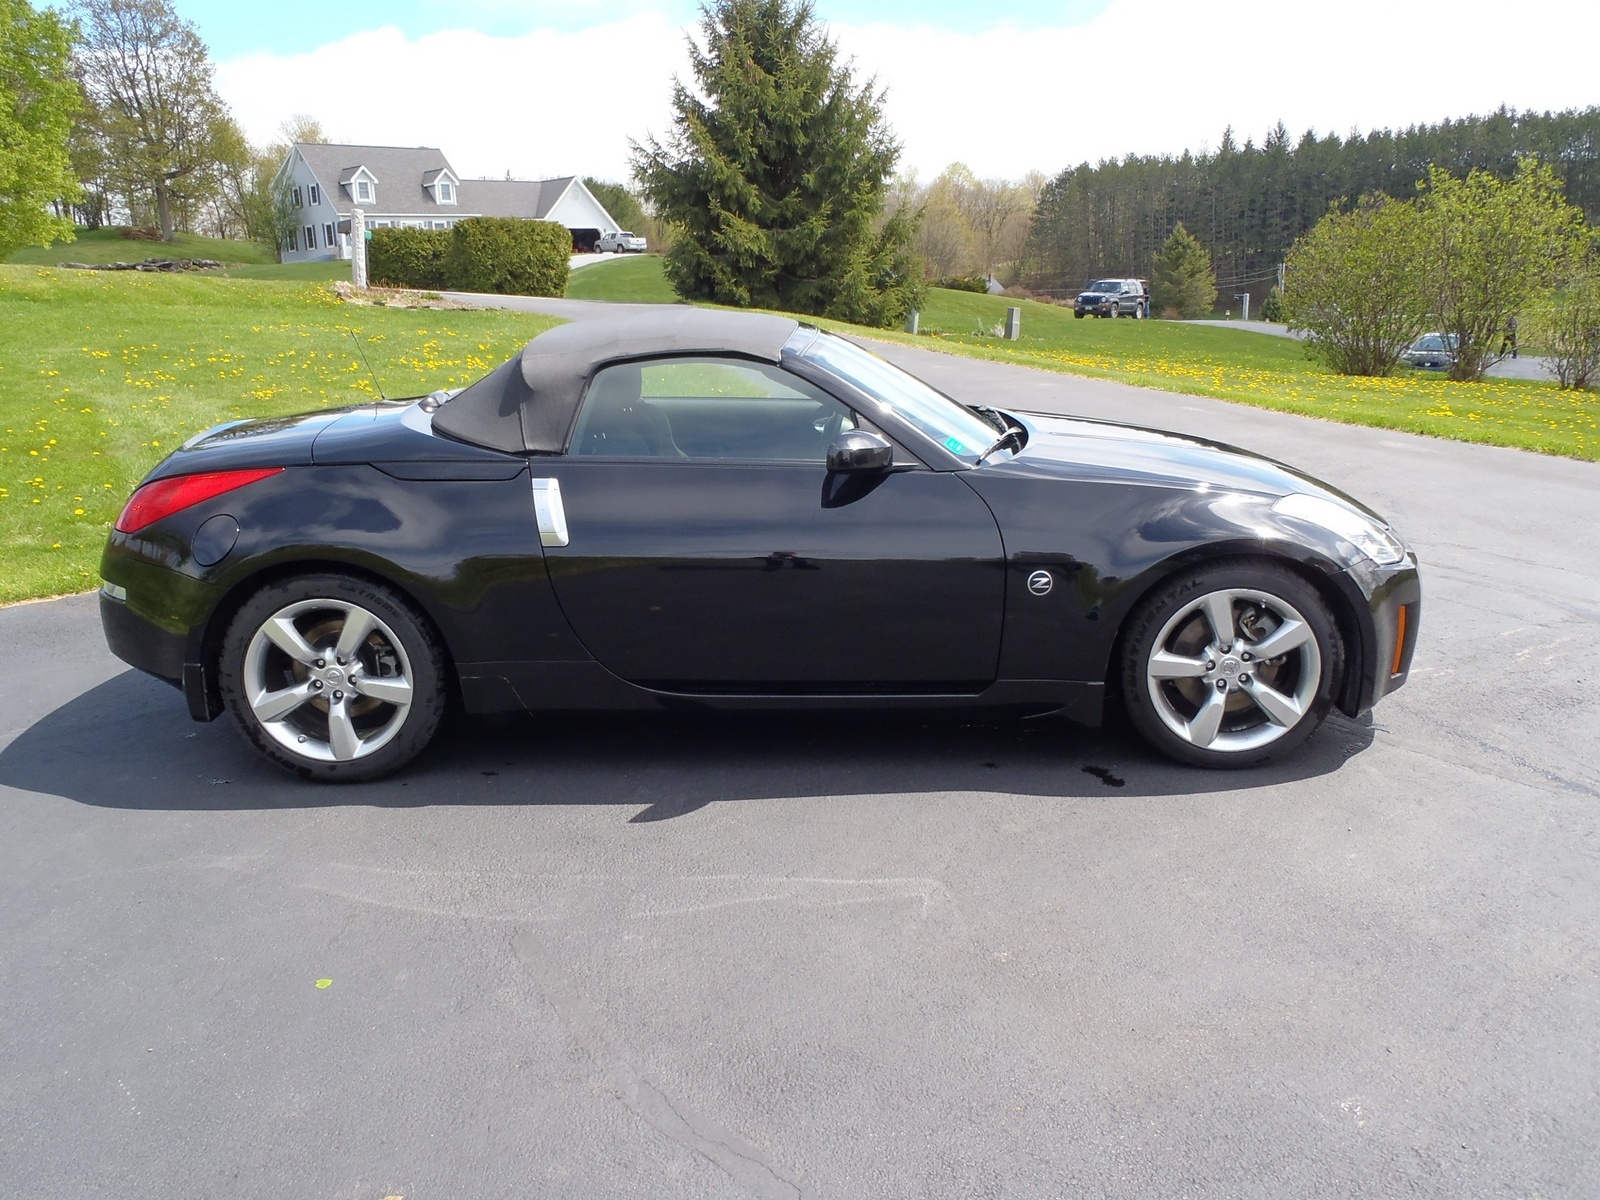 Nissan 350z convertible for sale calgary #5